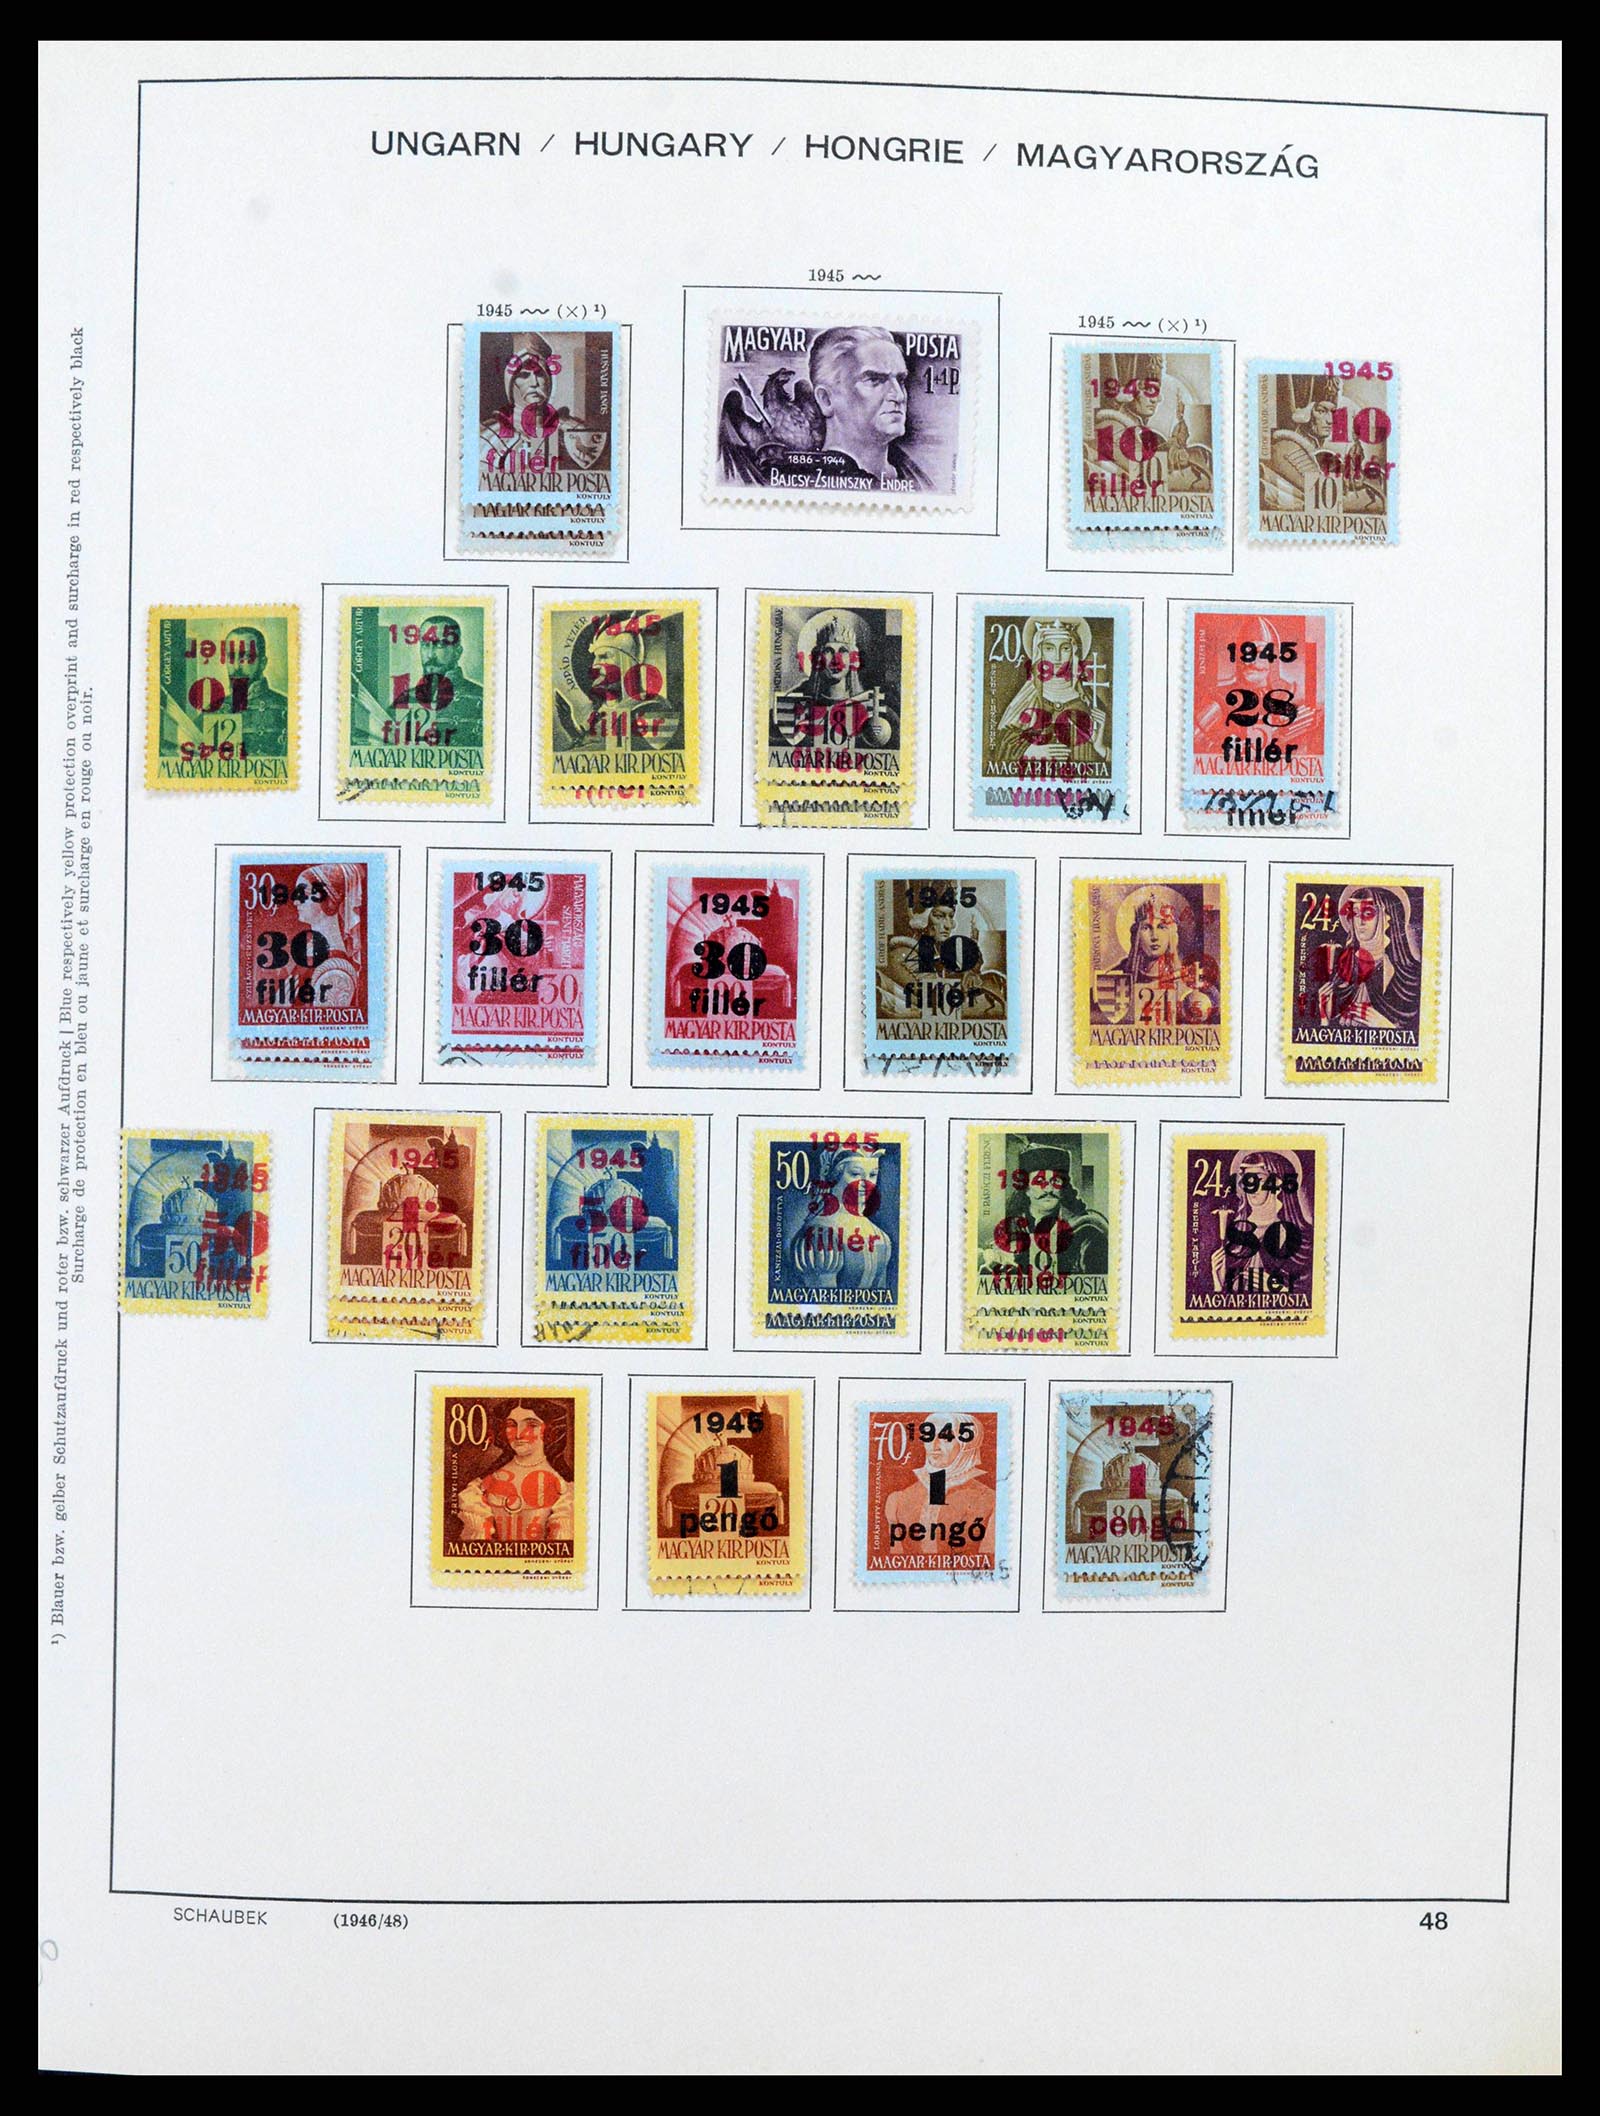 38953 0052 - Stamp collection 38953 Hungary 1873-1995.